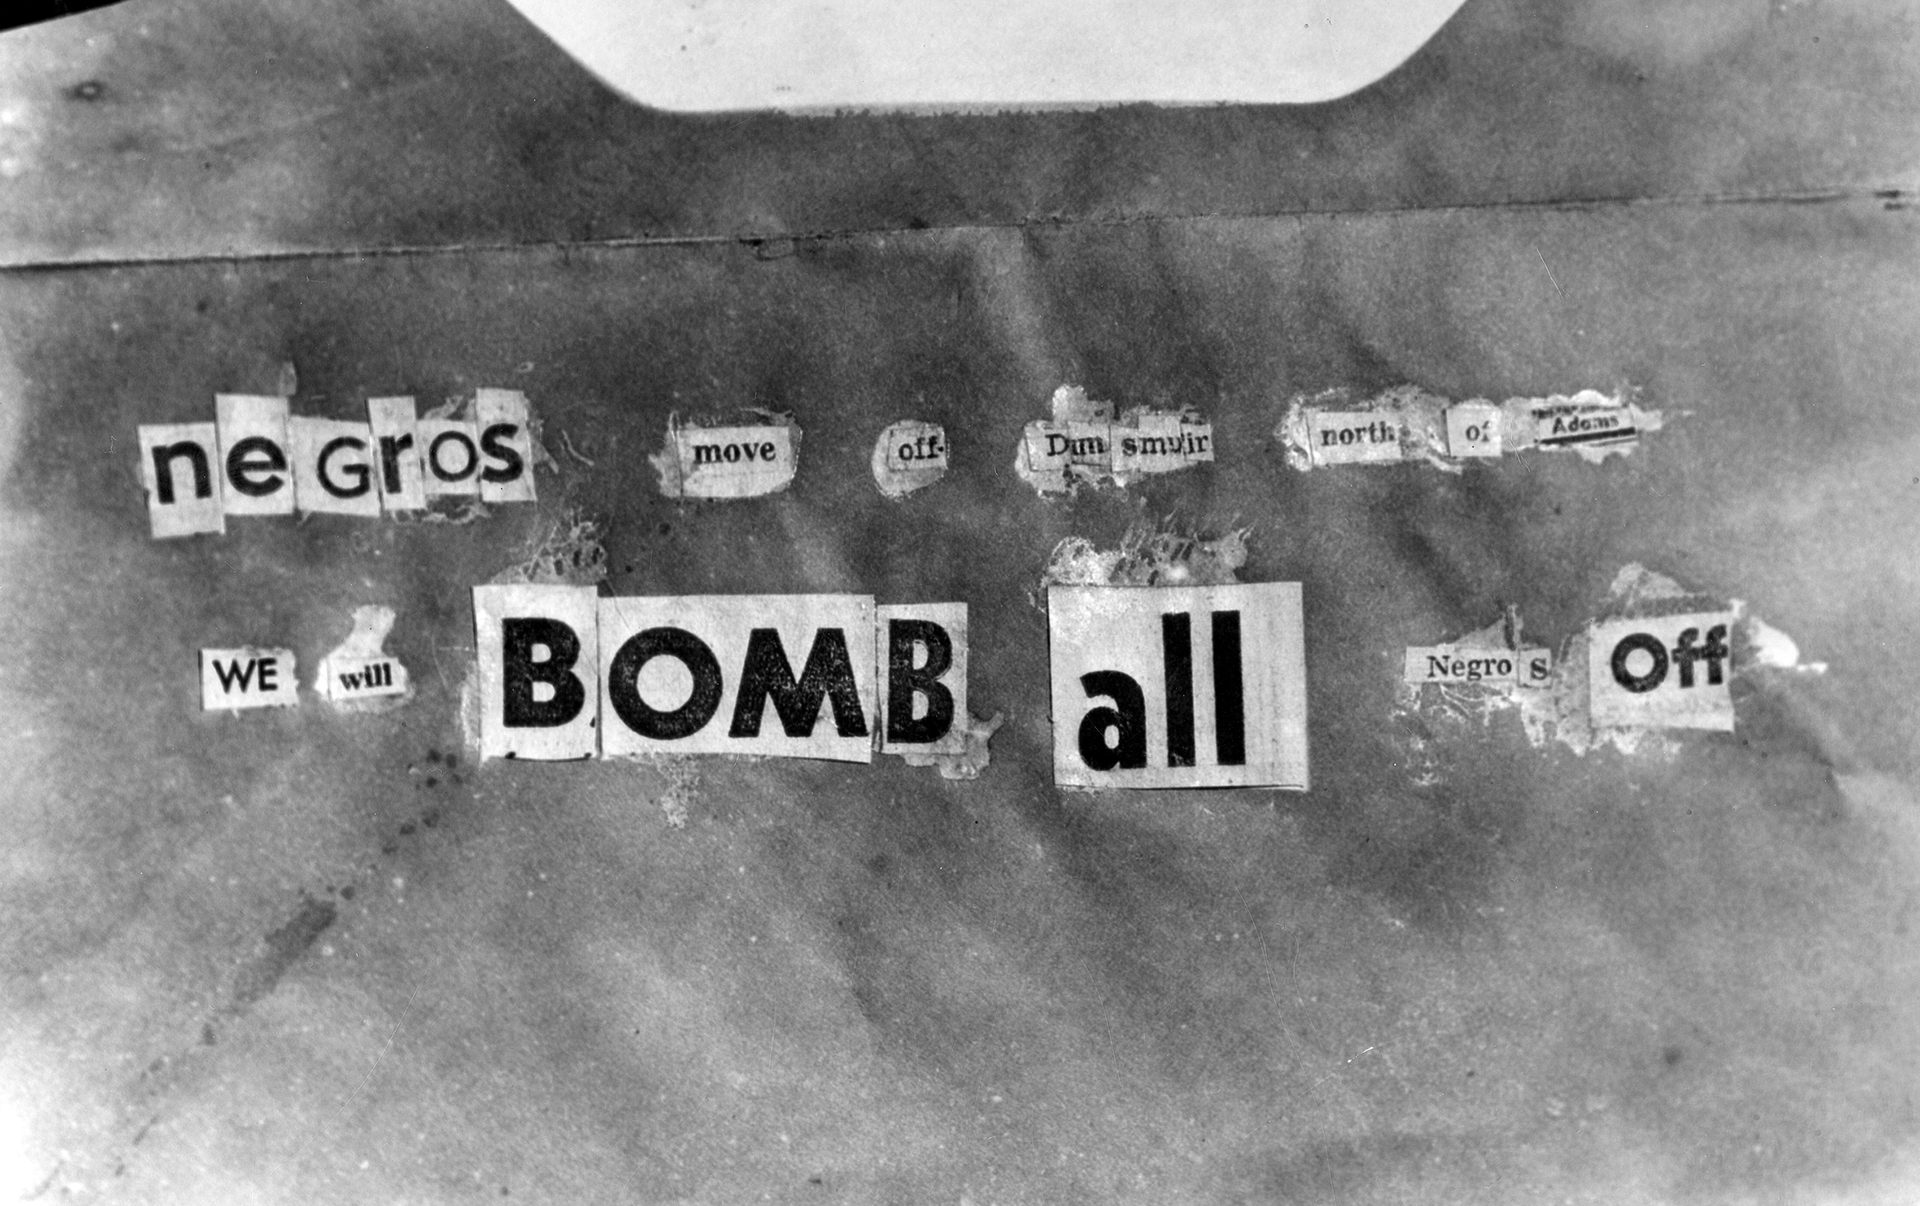 Copy of bomb threat found at William Bailey's house in Los Angeles, taken in March 1952.